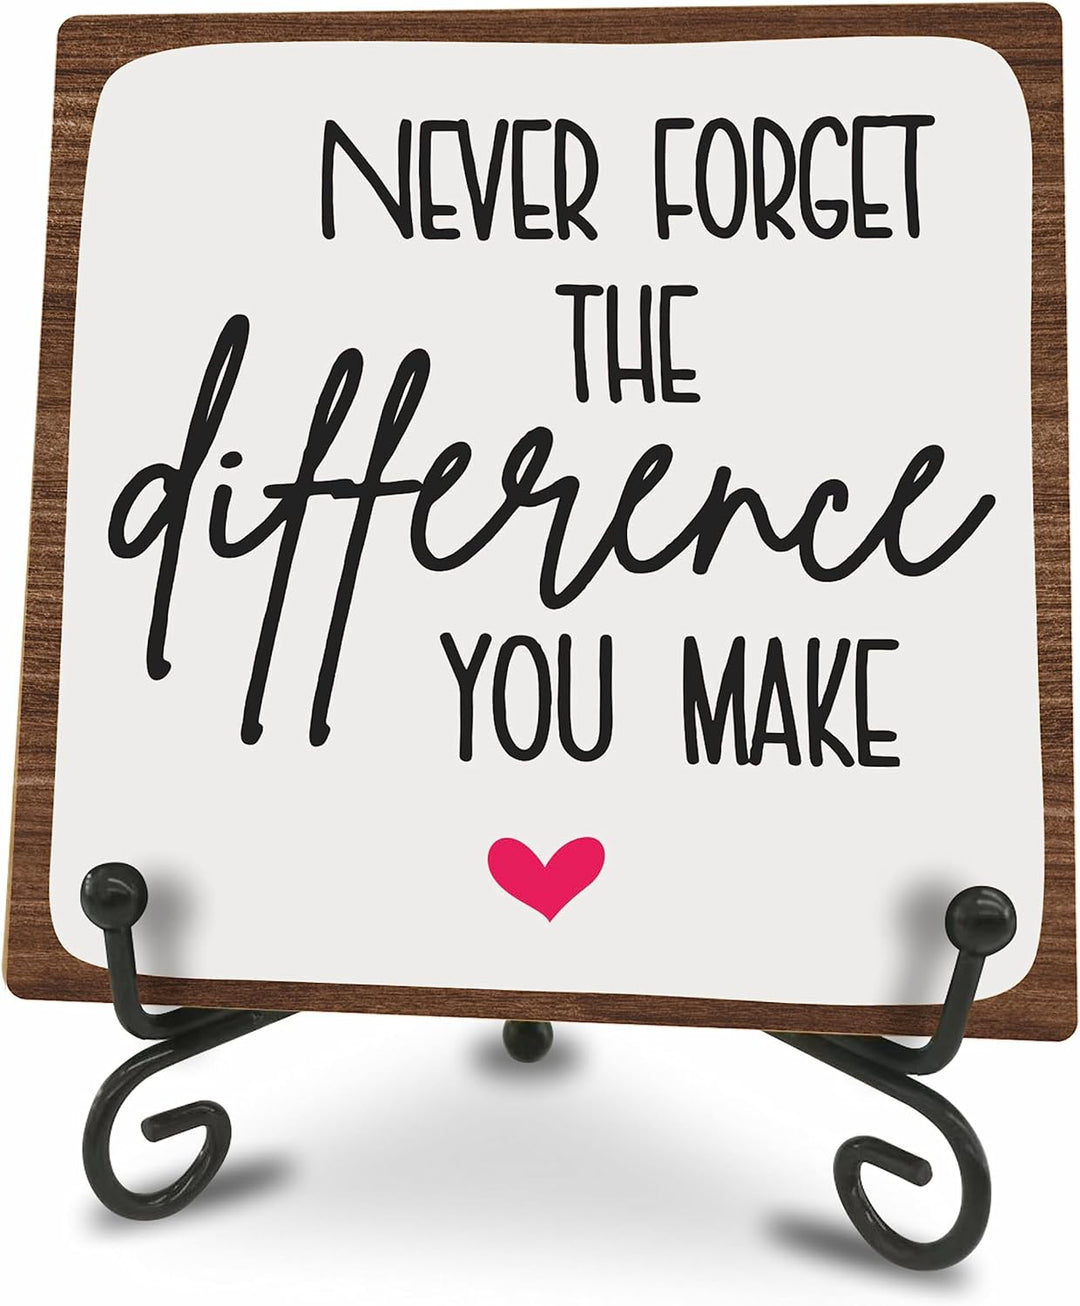 Wooden Sign - Never Forget the Difference You Make - Positive Reminder，Motivational Wood Plaque with a Support Frame - Home & Office Inspirational Gifts for Women & Man, Desk Decor & Accessories - A17